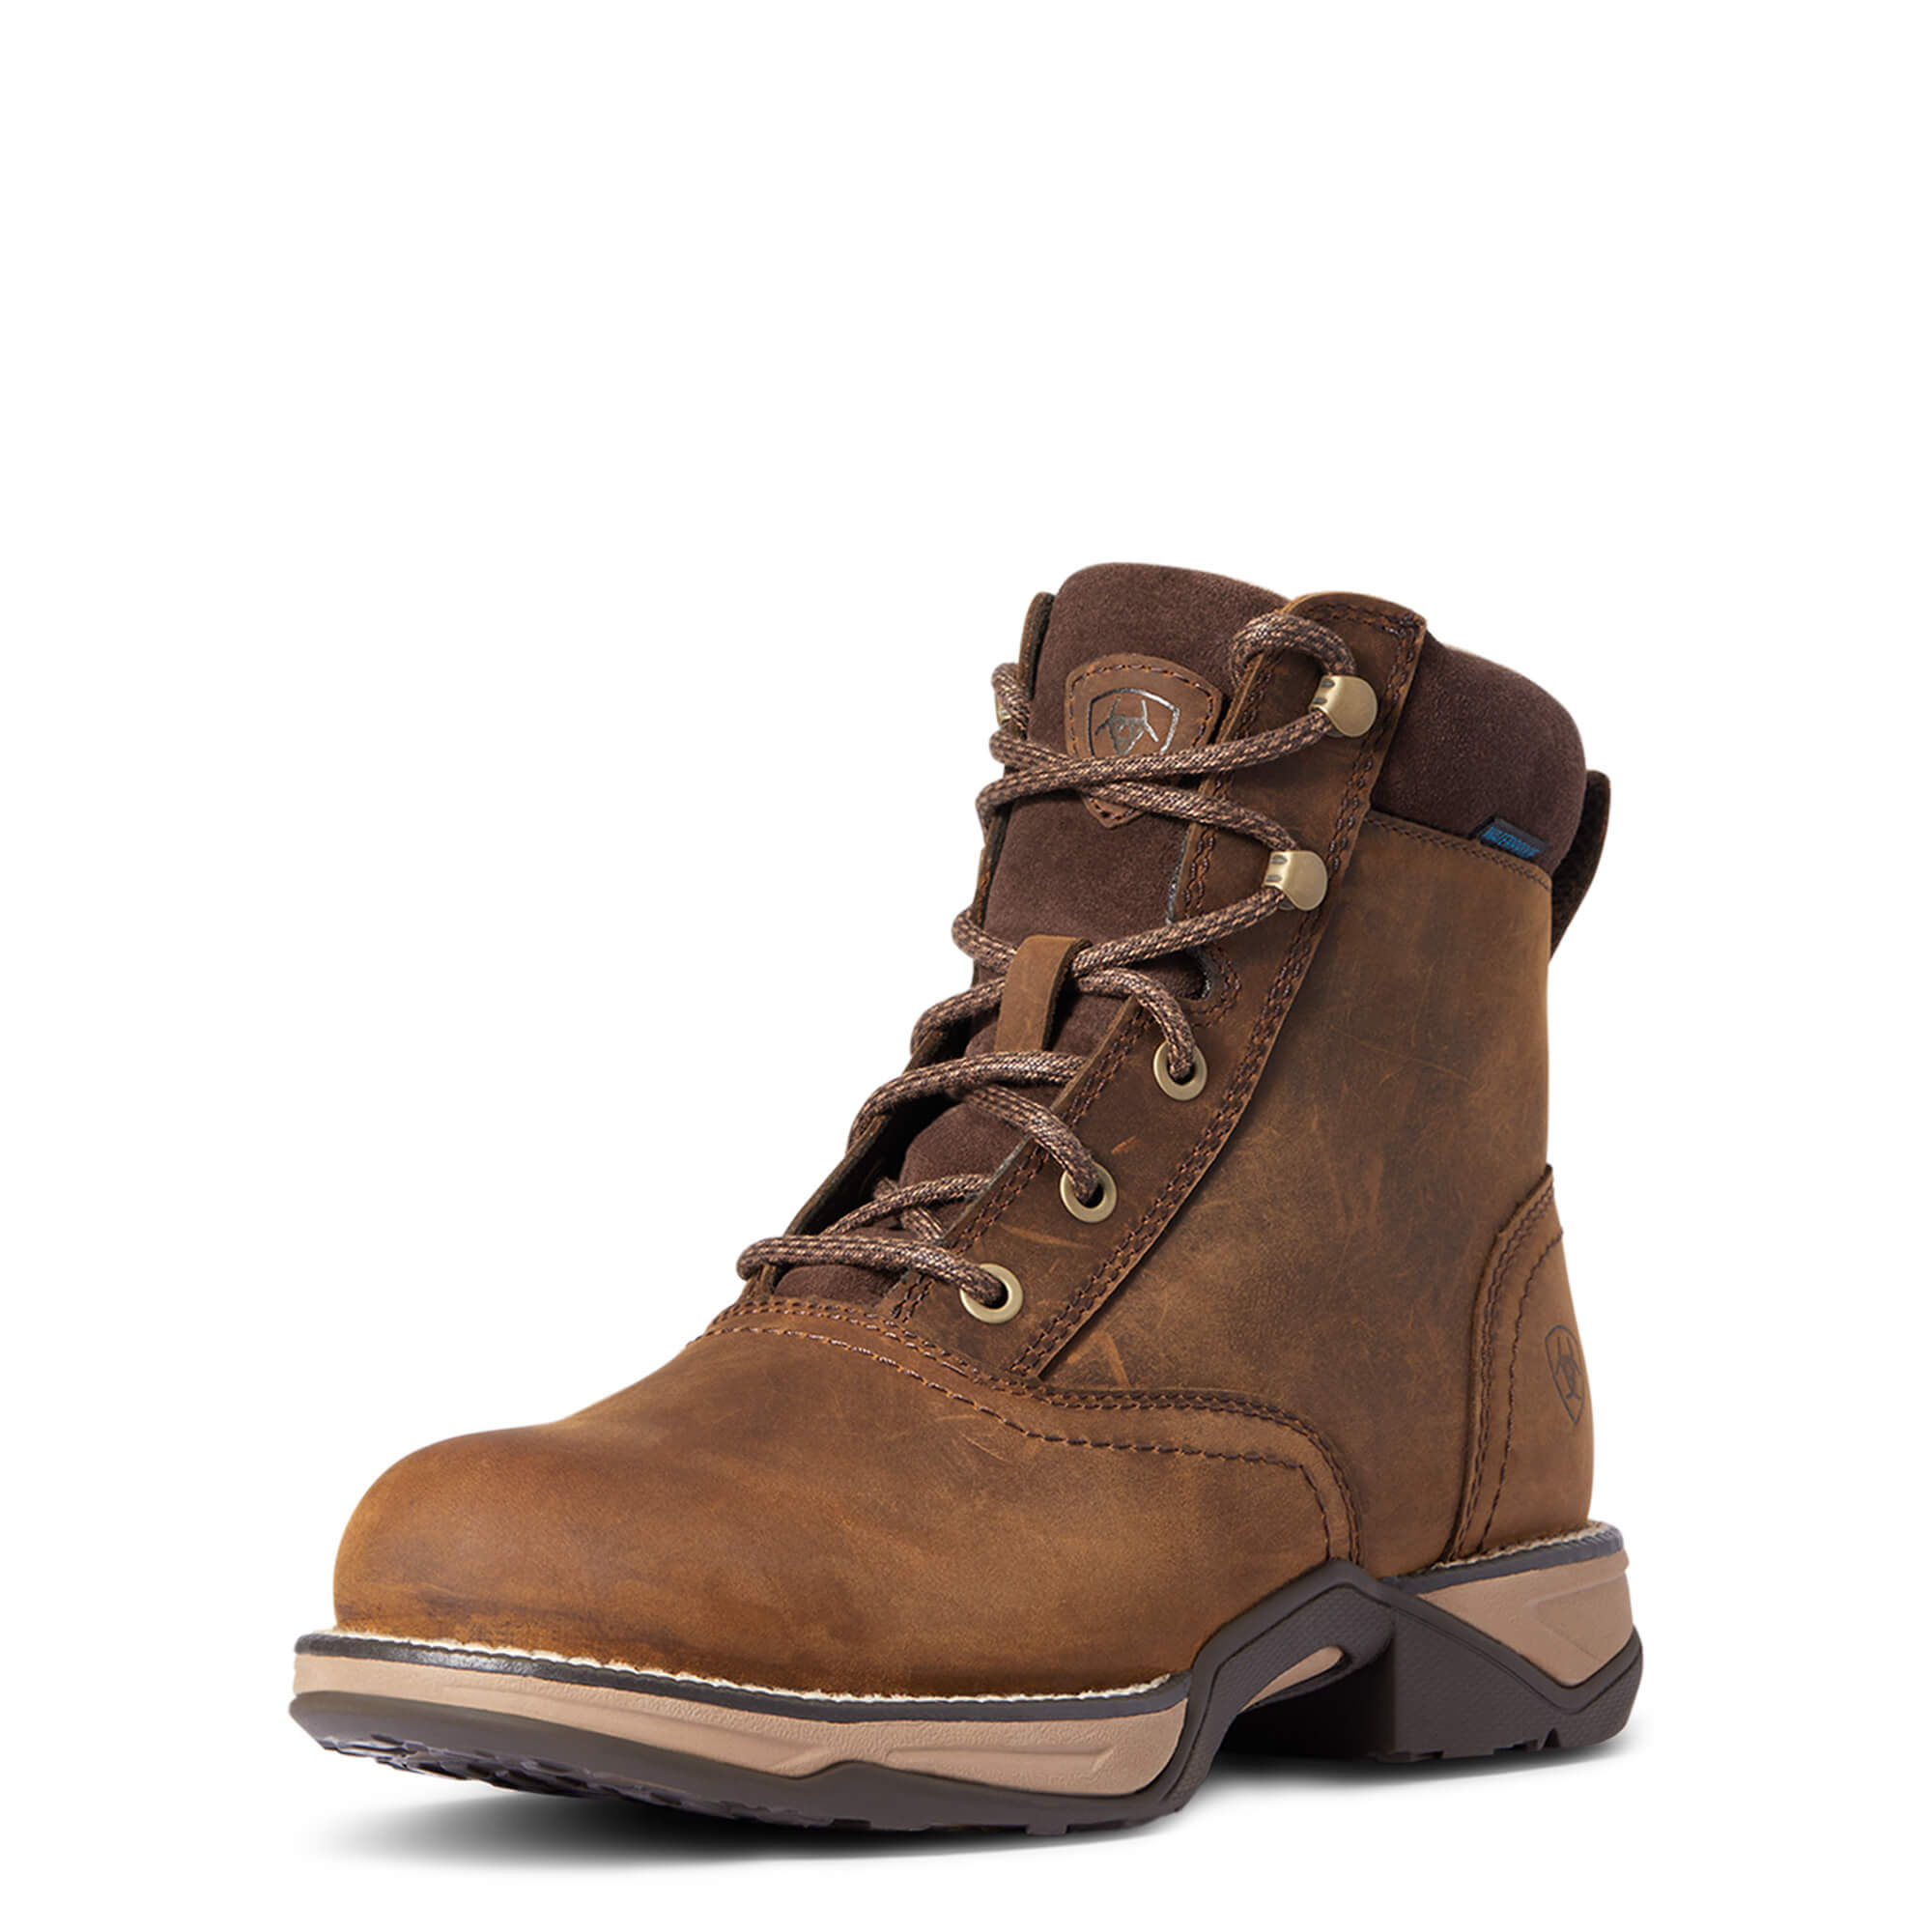 Ariat Anthem Lacer Boots round toe, Country Stiefeletten, Wester